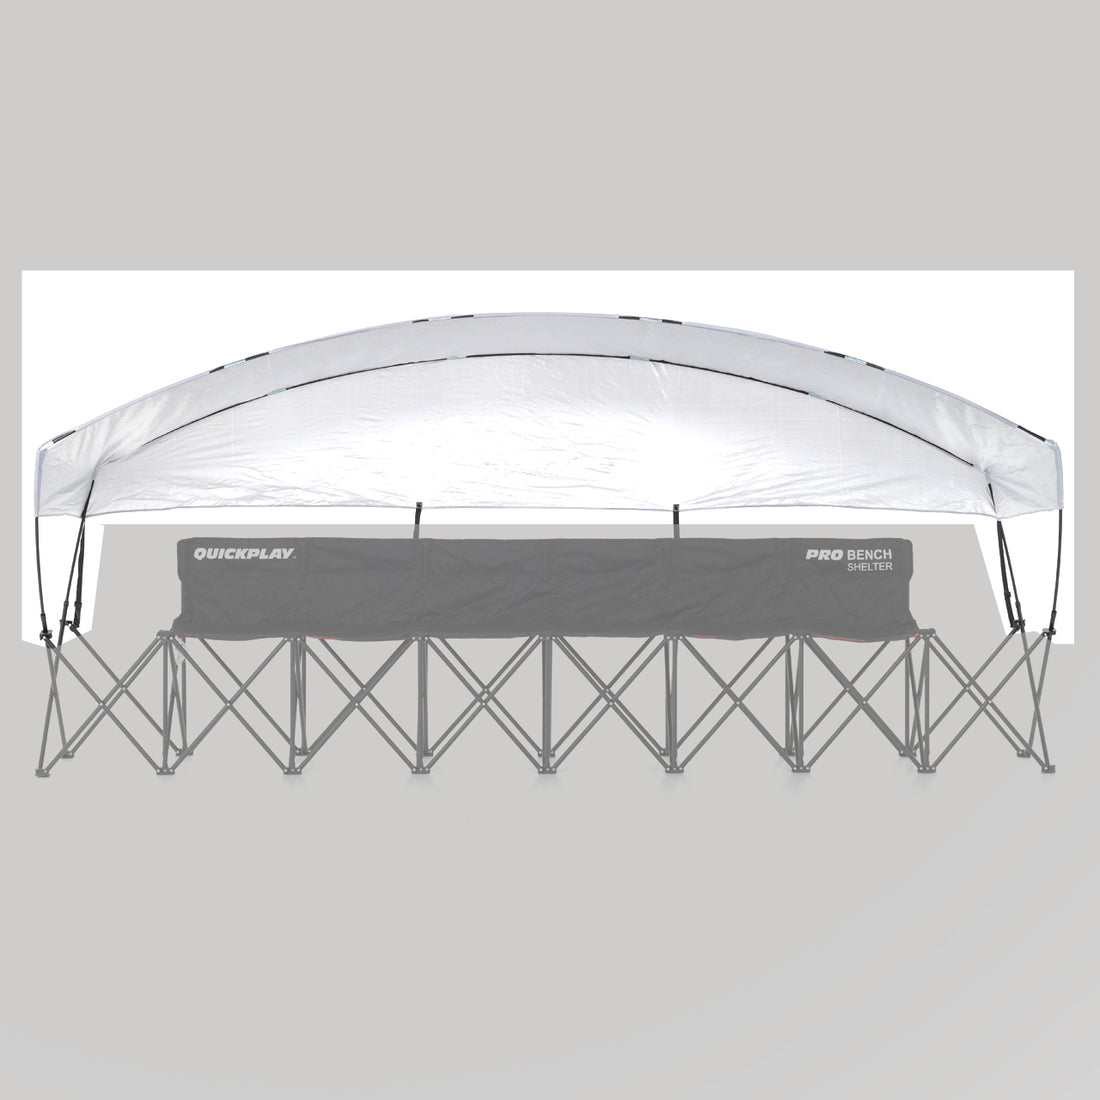 SPARE PART - SHELTER - Pro Bench Shelter 6 Seat Replacement cover with fibreglass poles